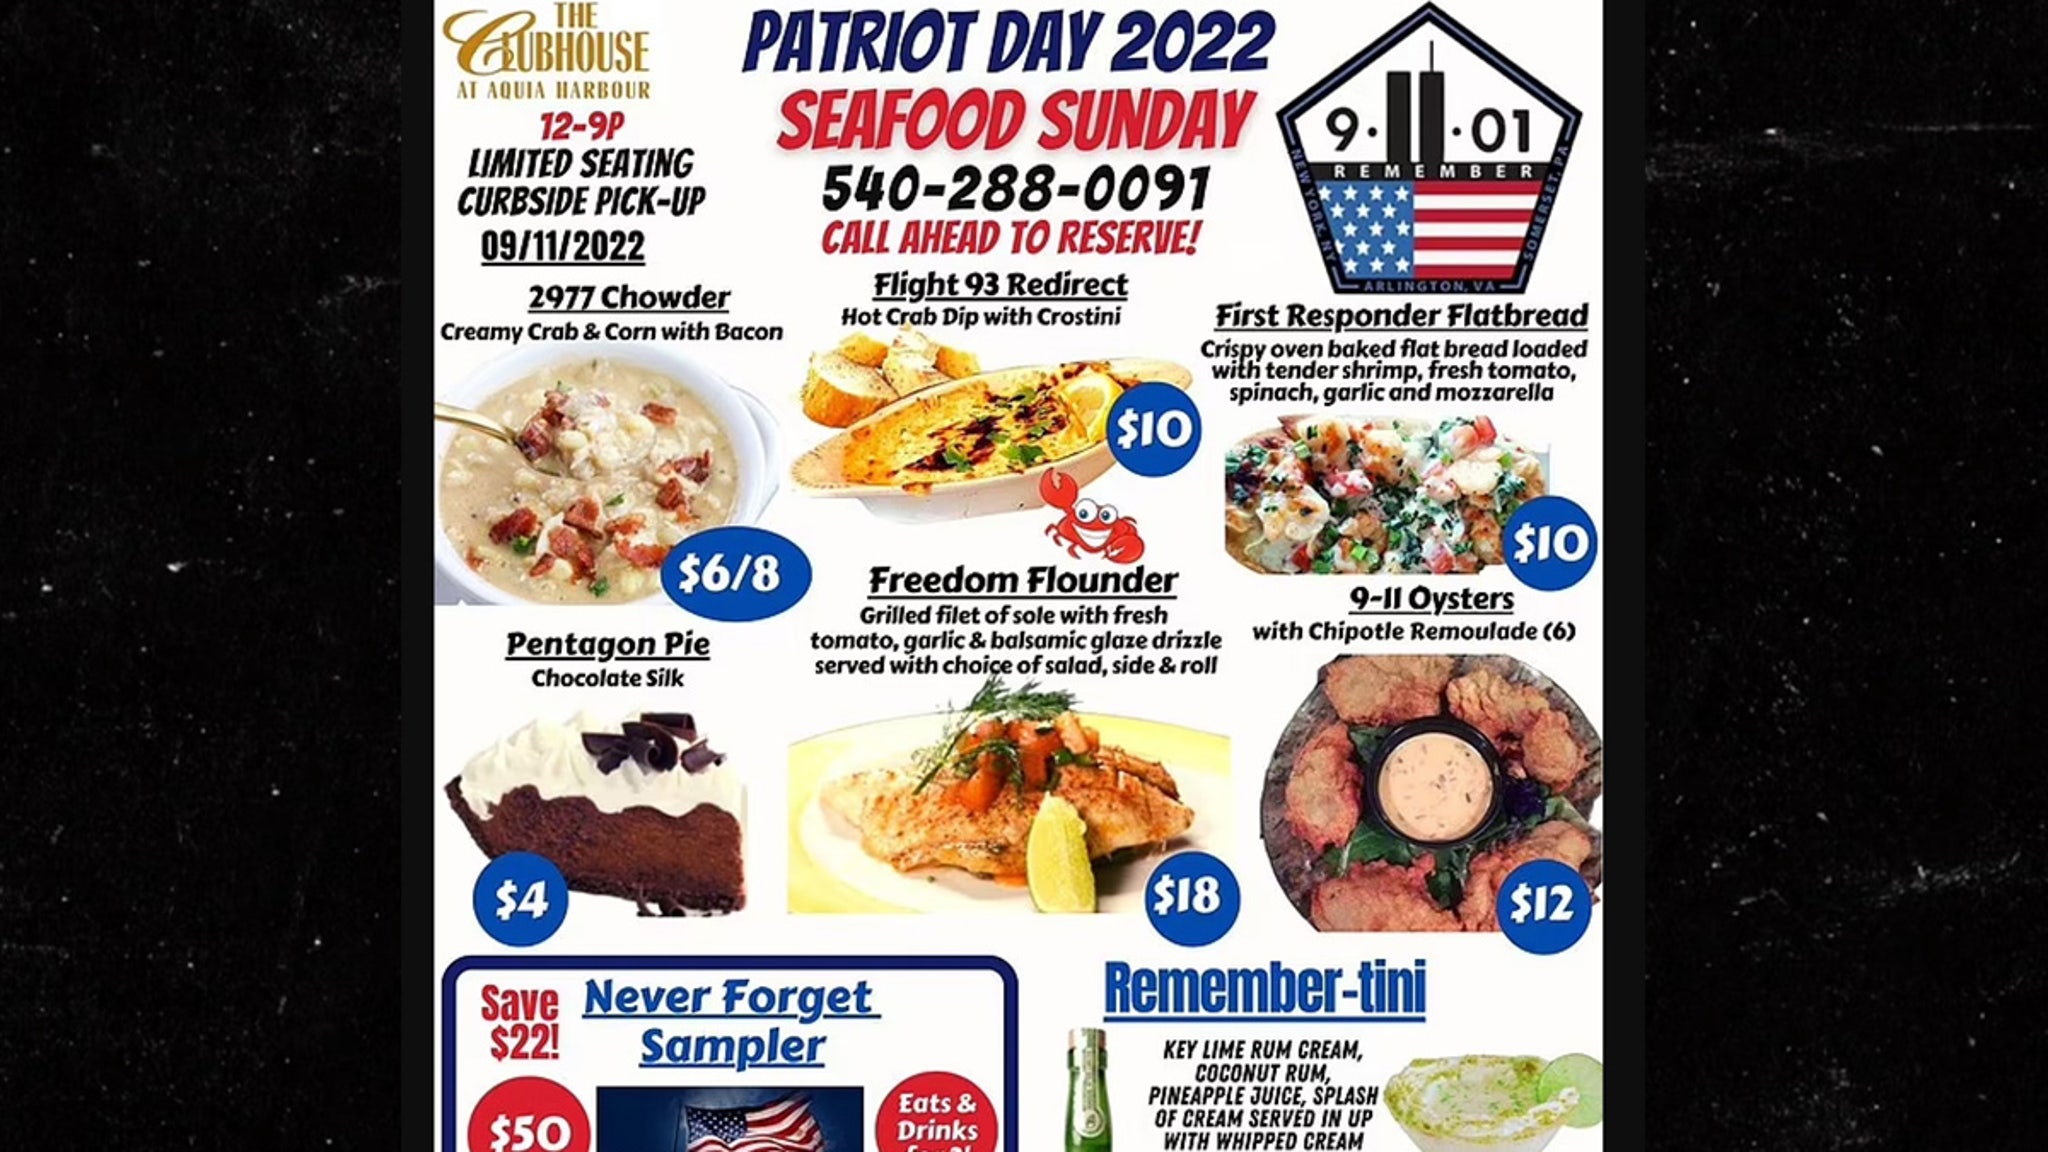 Virginia restaurant apologizes after 9/11 themed menu